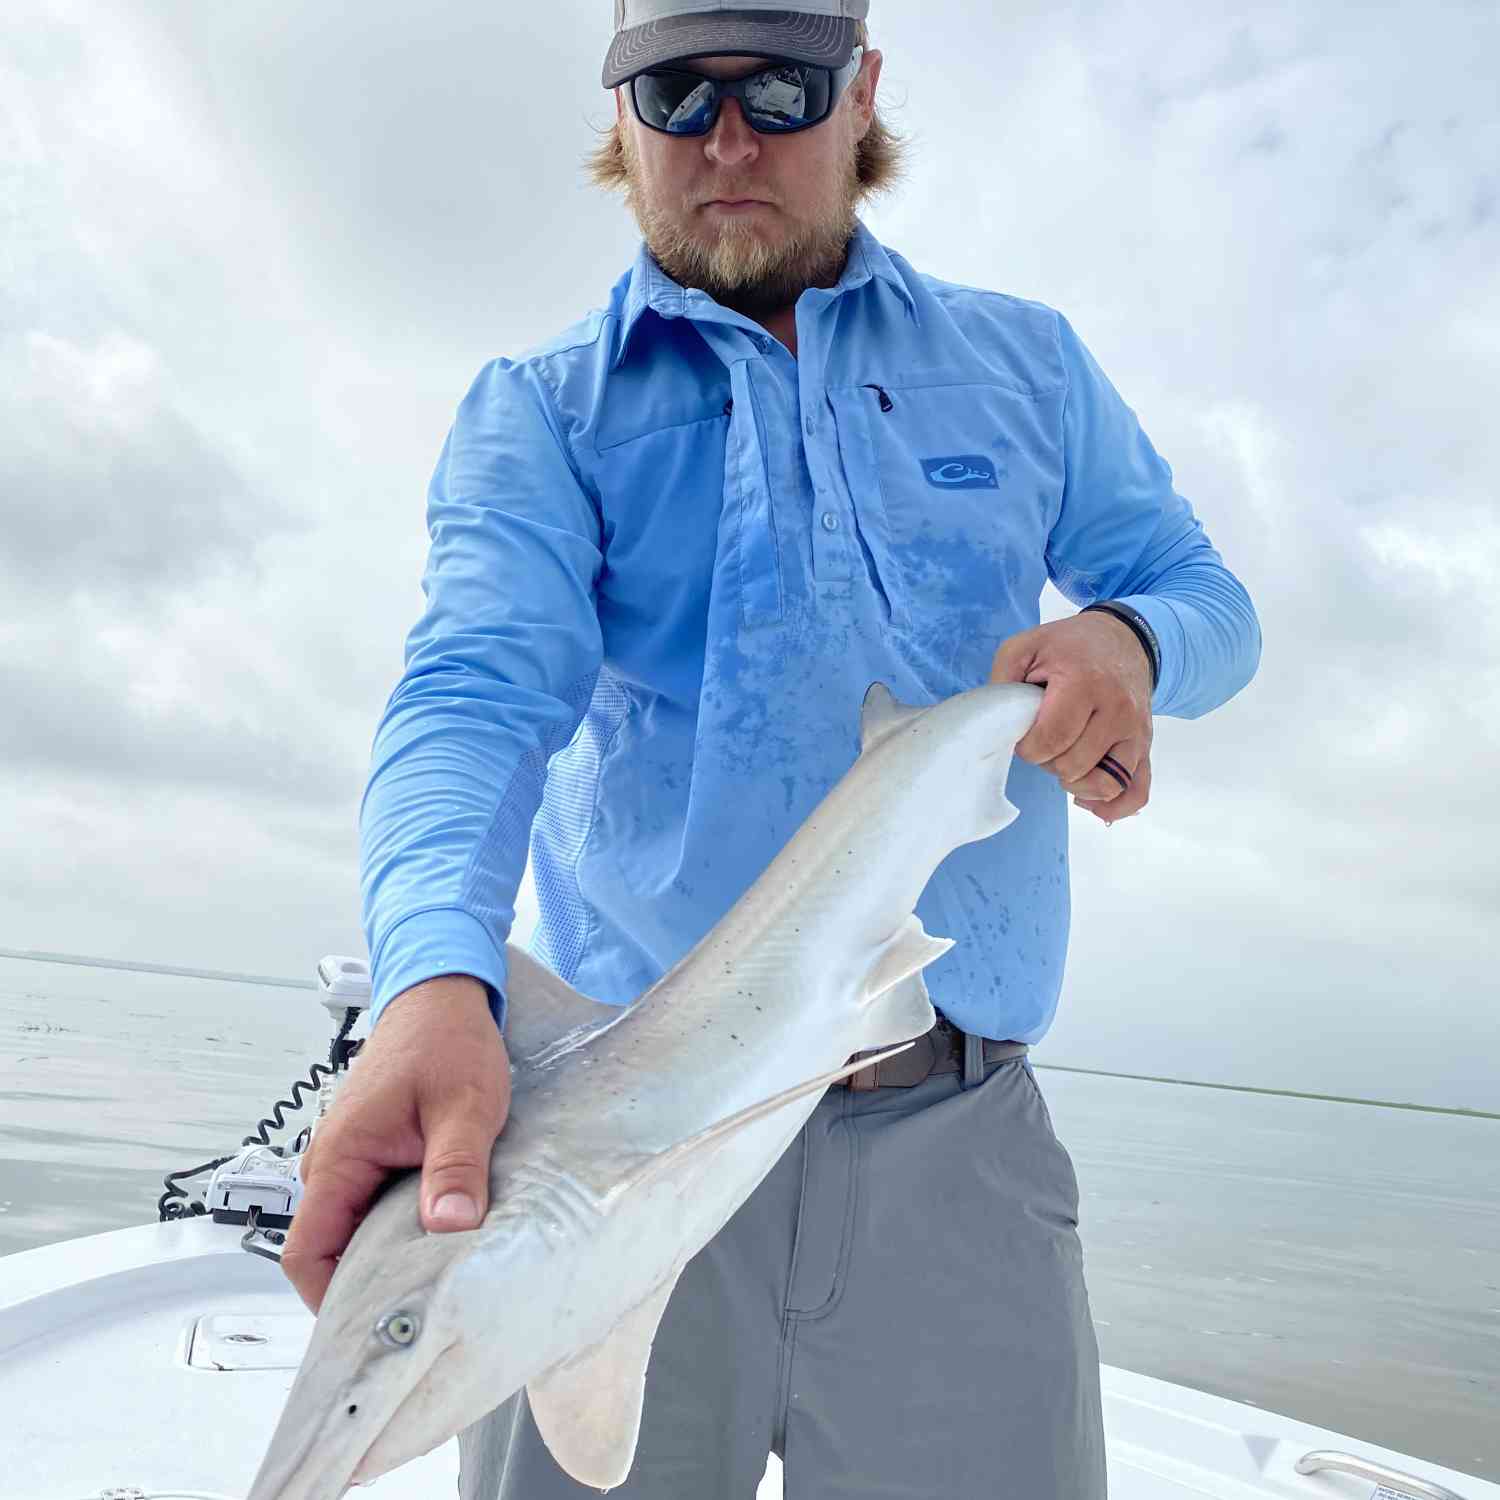 Title: Out fishing in the Sportsman - On board their Sportsman Masters 207 Bay Boat - Location: Shellmans Bluff, Ga. Participating in the Photo Contest #SportsmanJune2020